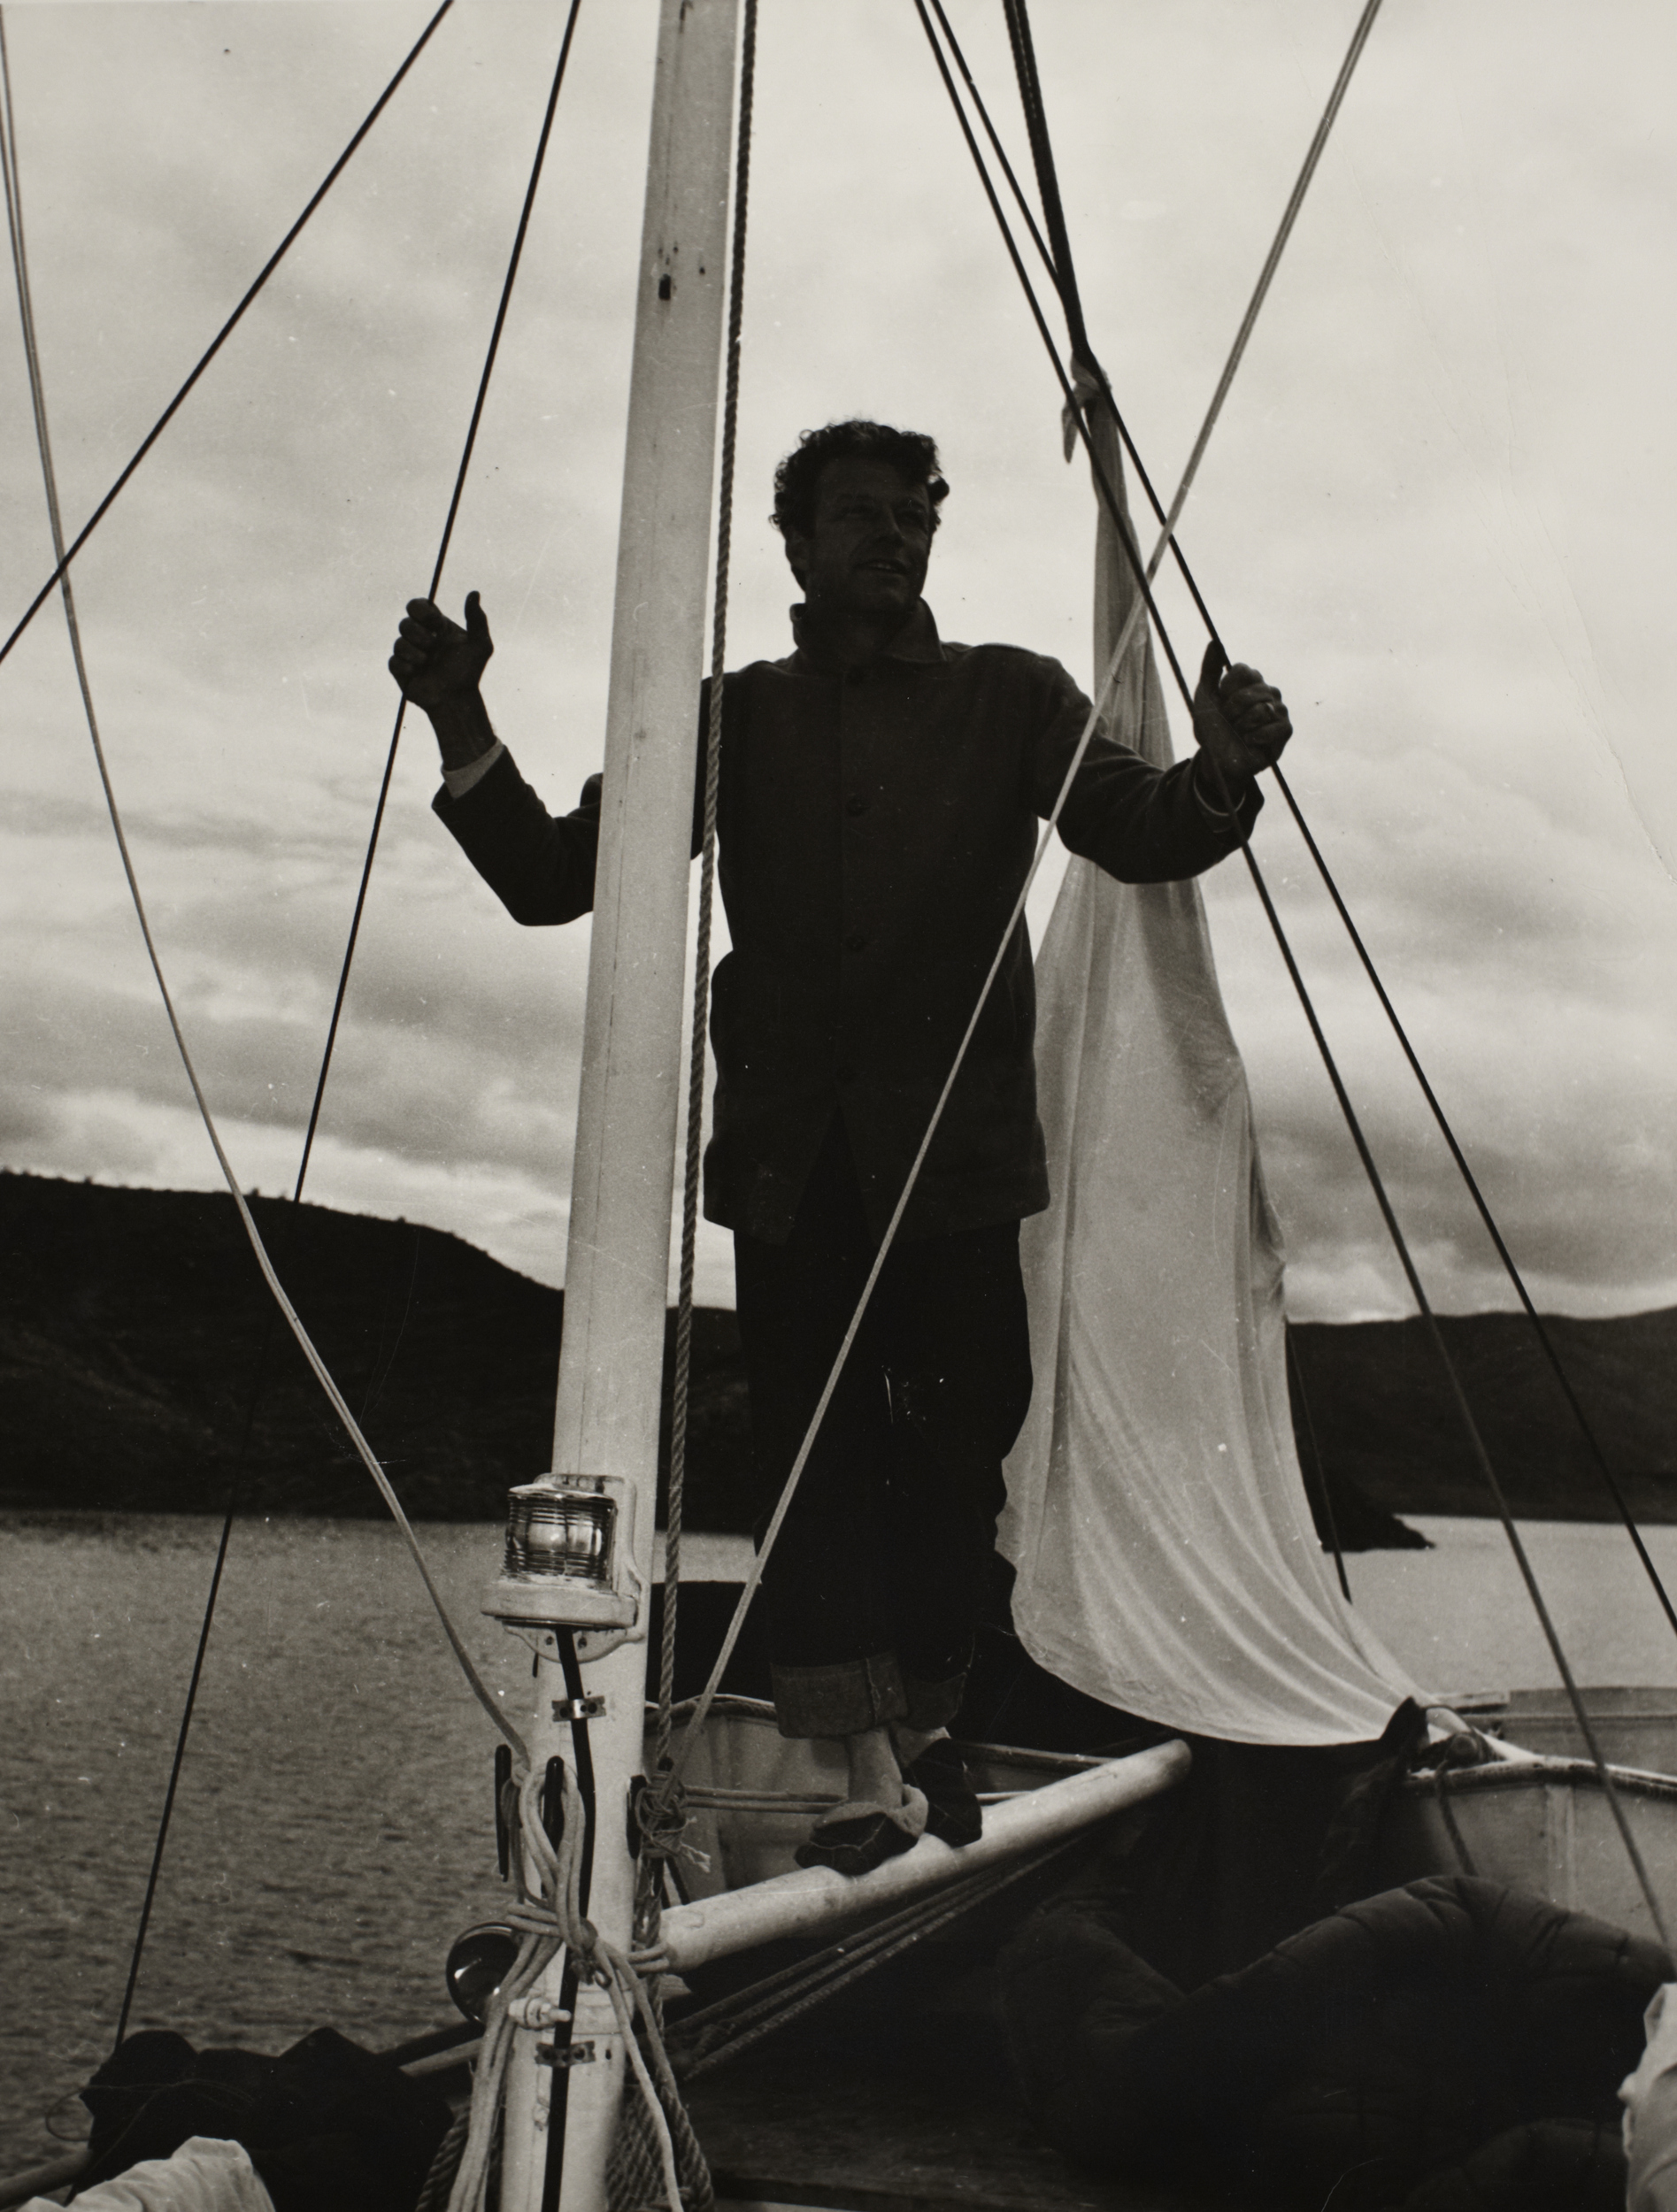 Rex Bell on a sailboat at Lake Mead: photographic print